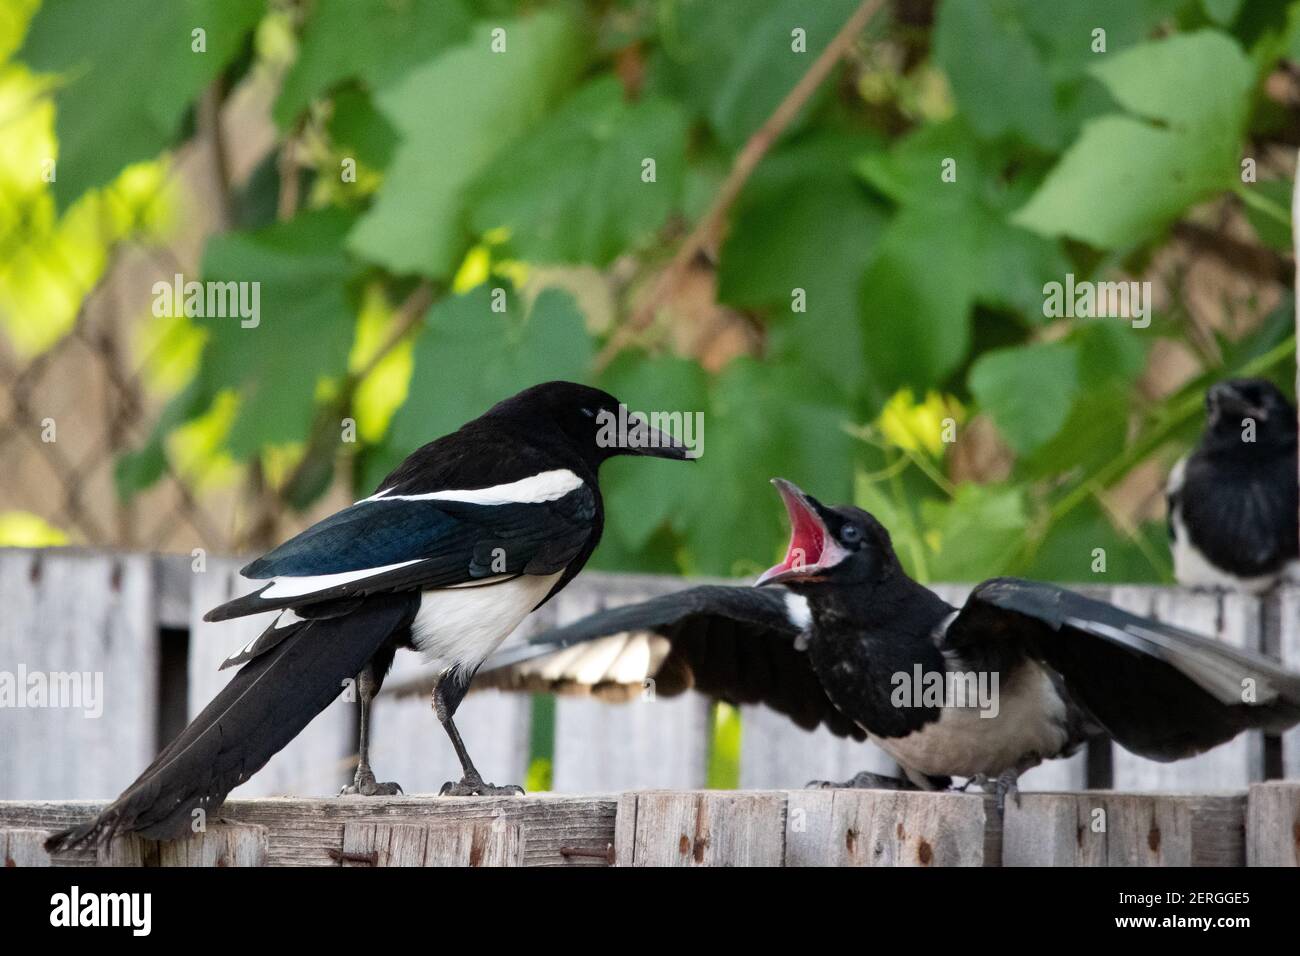 Two Black-billed Magpies or American Magpies, Pica hudsonia, in conflict in Utah. Stock Photo